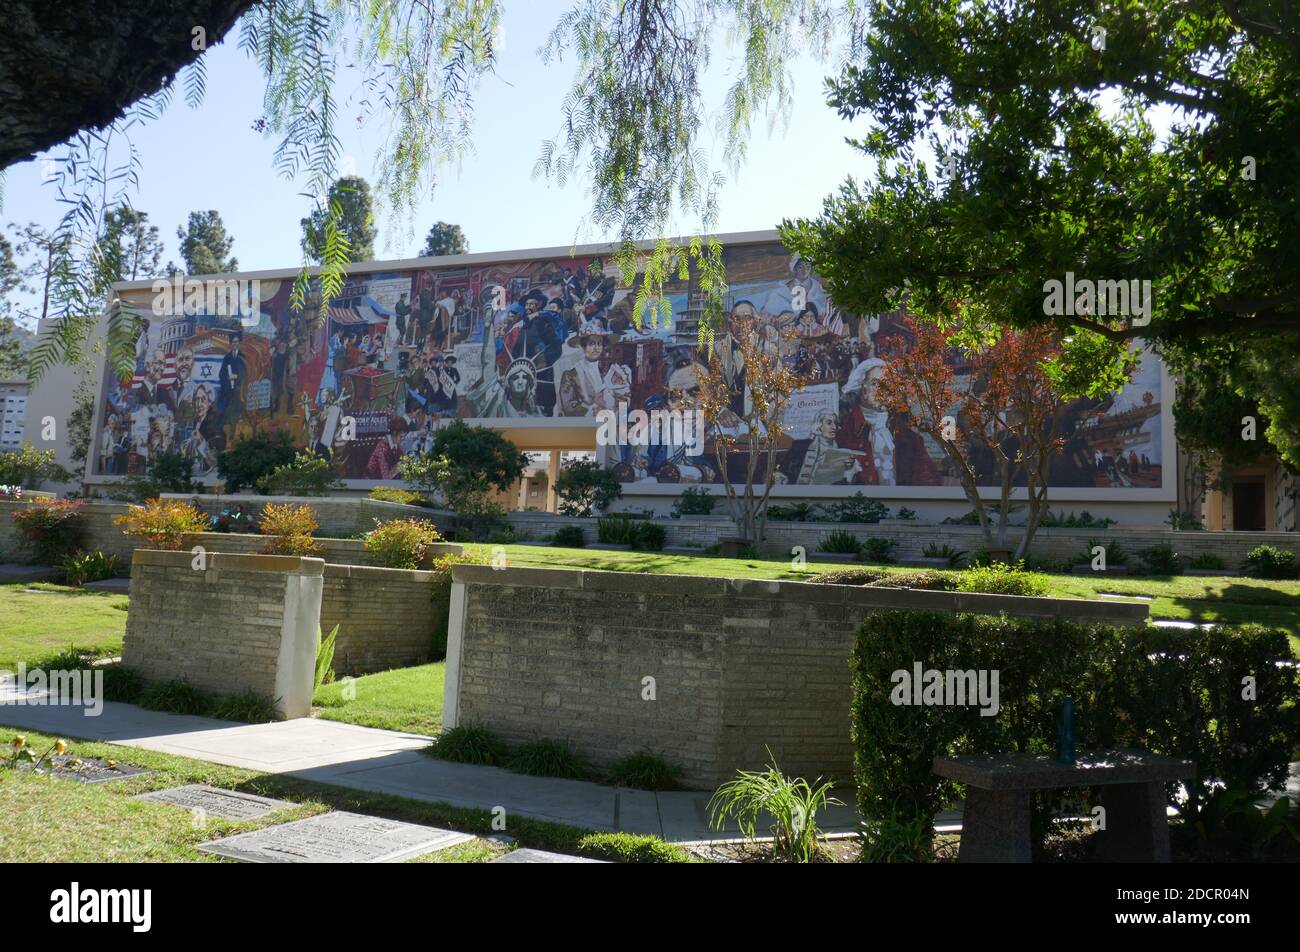 Los Angeles, California, USA 17th November 2020 A general view of atmosphere of Heritage Mosaic at Mount Sinai Cemetery Hollywood Hills on November 17, 2020 in Los Angeles, California, USA. Photo by Barry King/Alamy Stock Photo Stock Photo